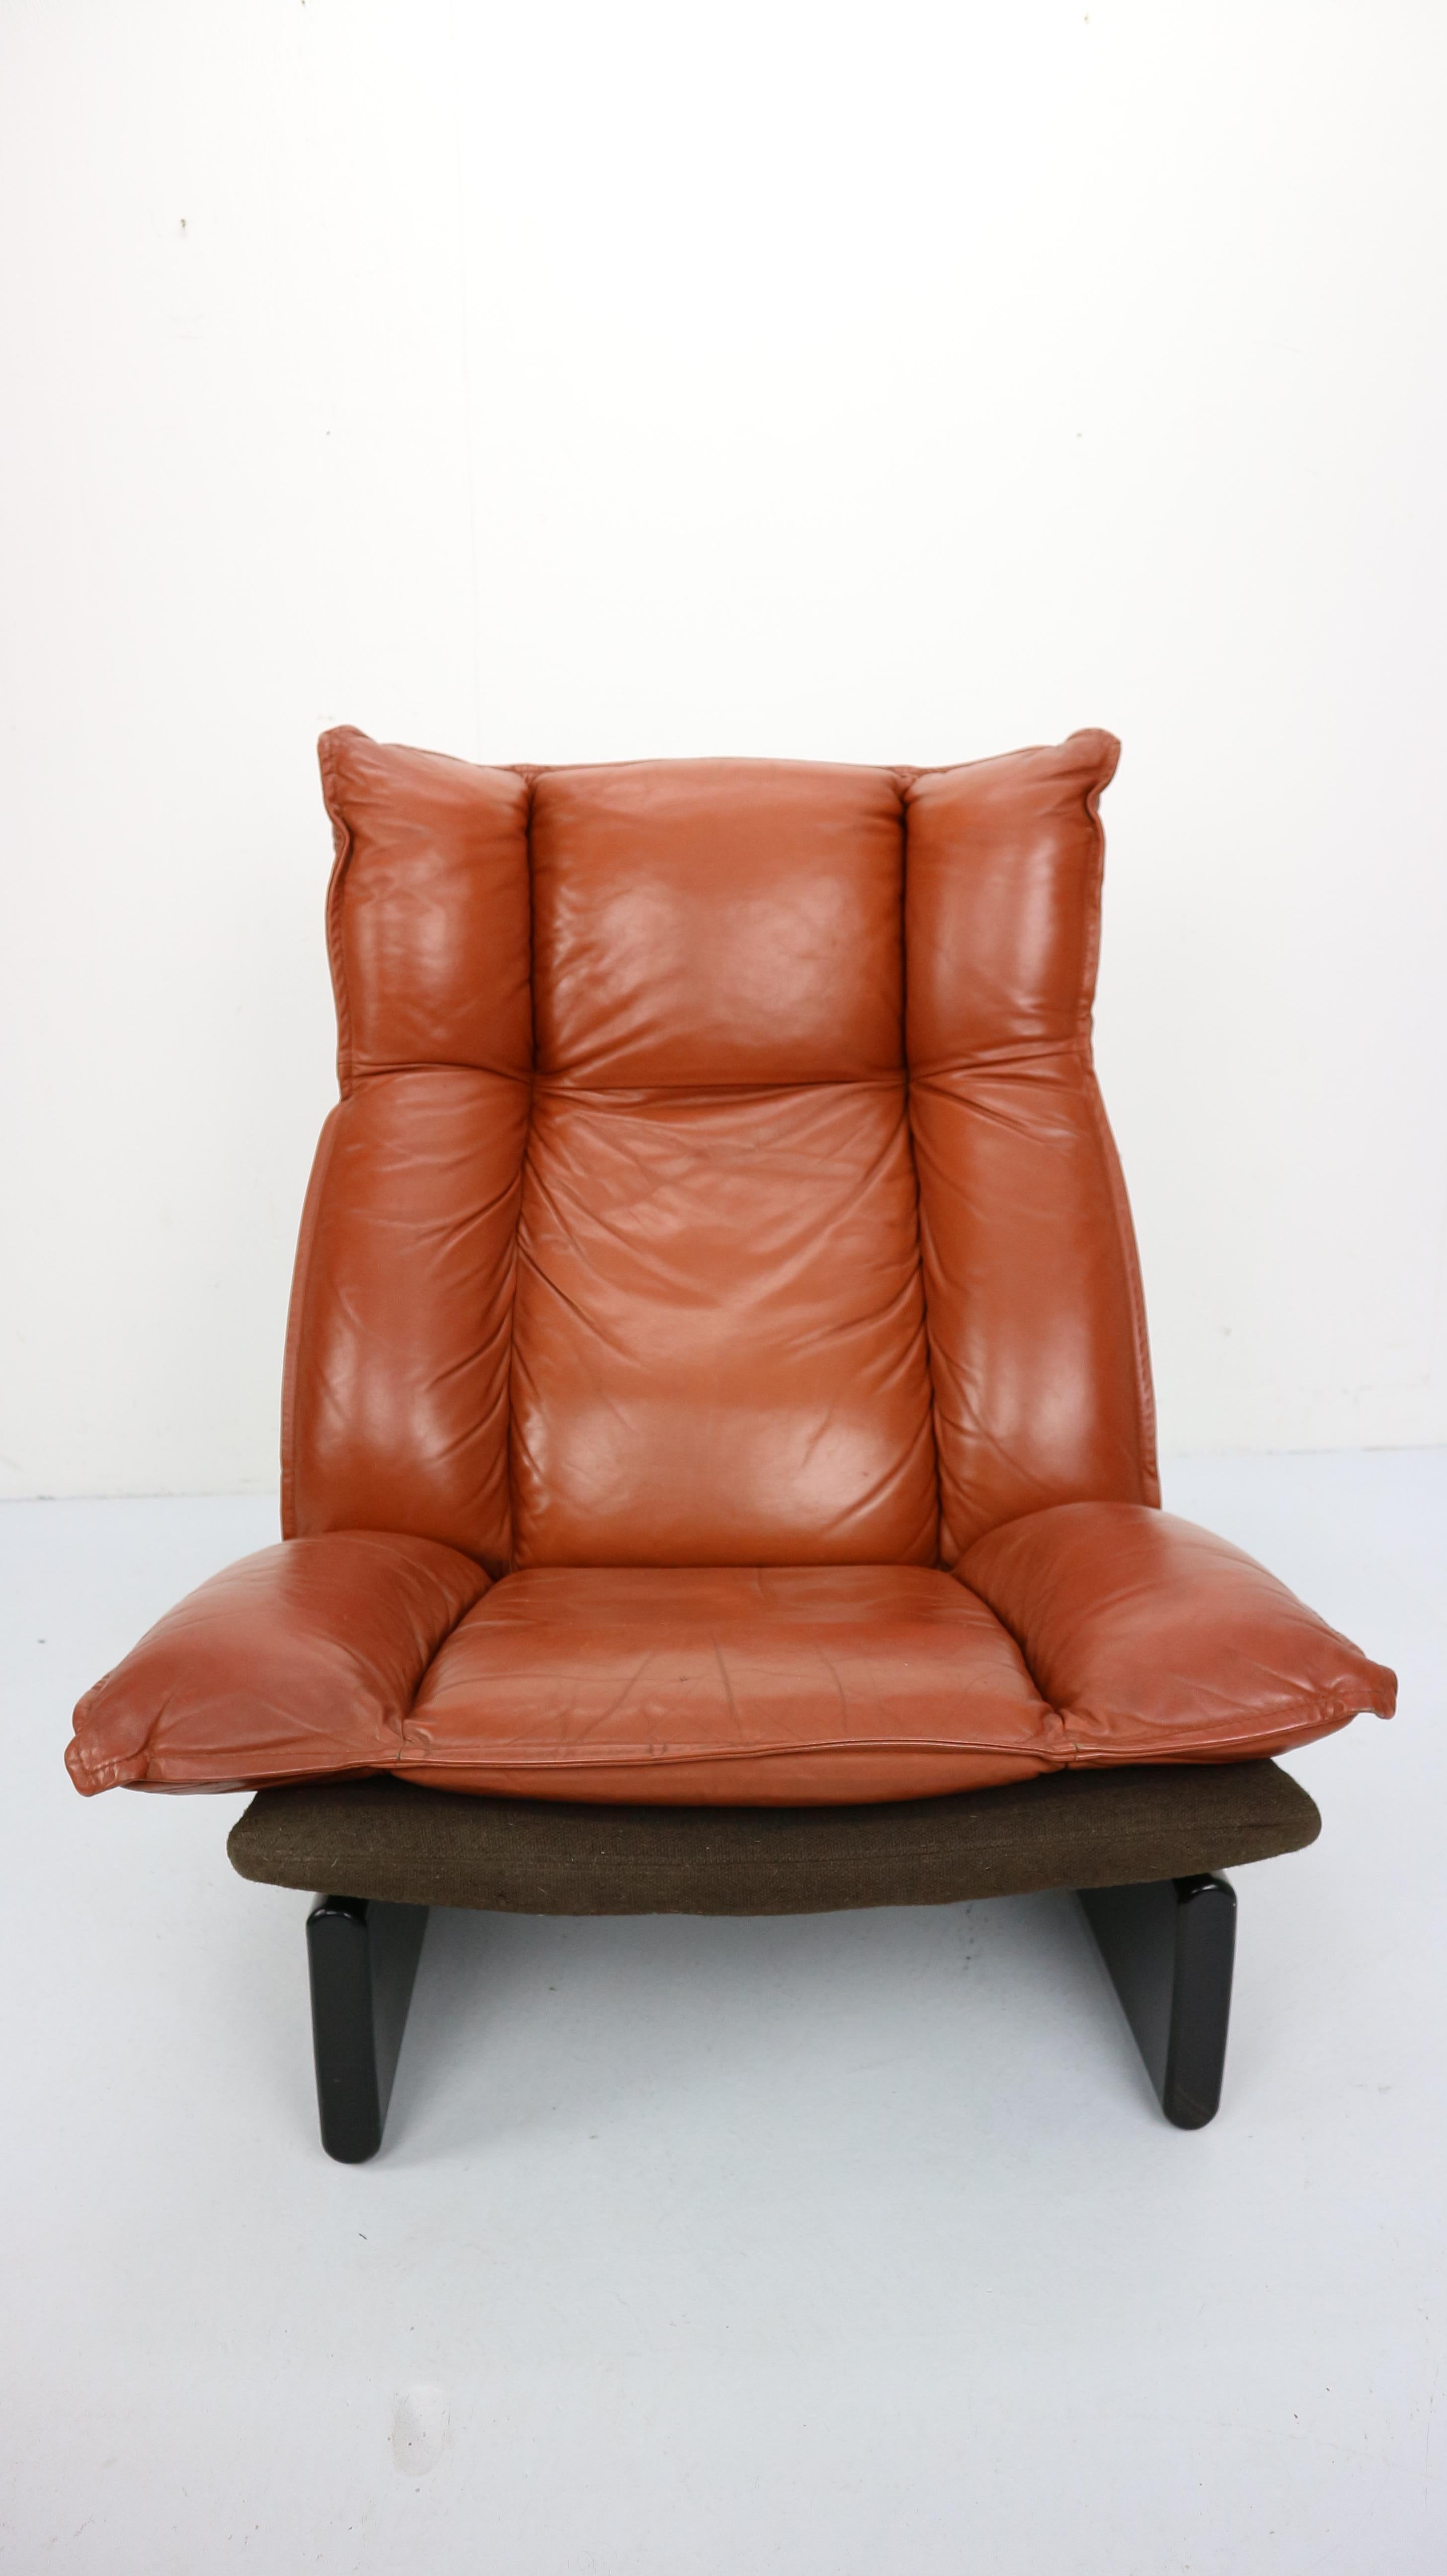 Cognac Leather and Wood Lounge Chair, Dutch Modern Design, 1970s 1